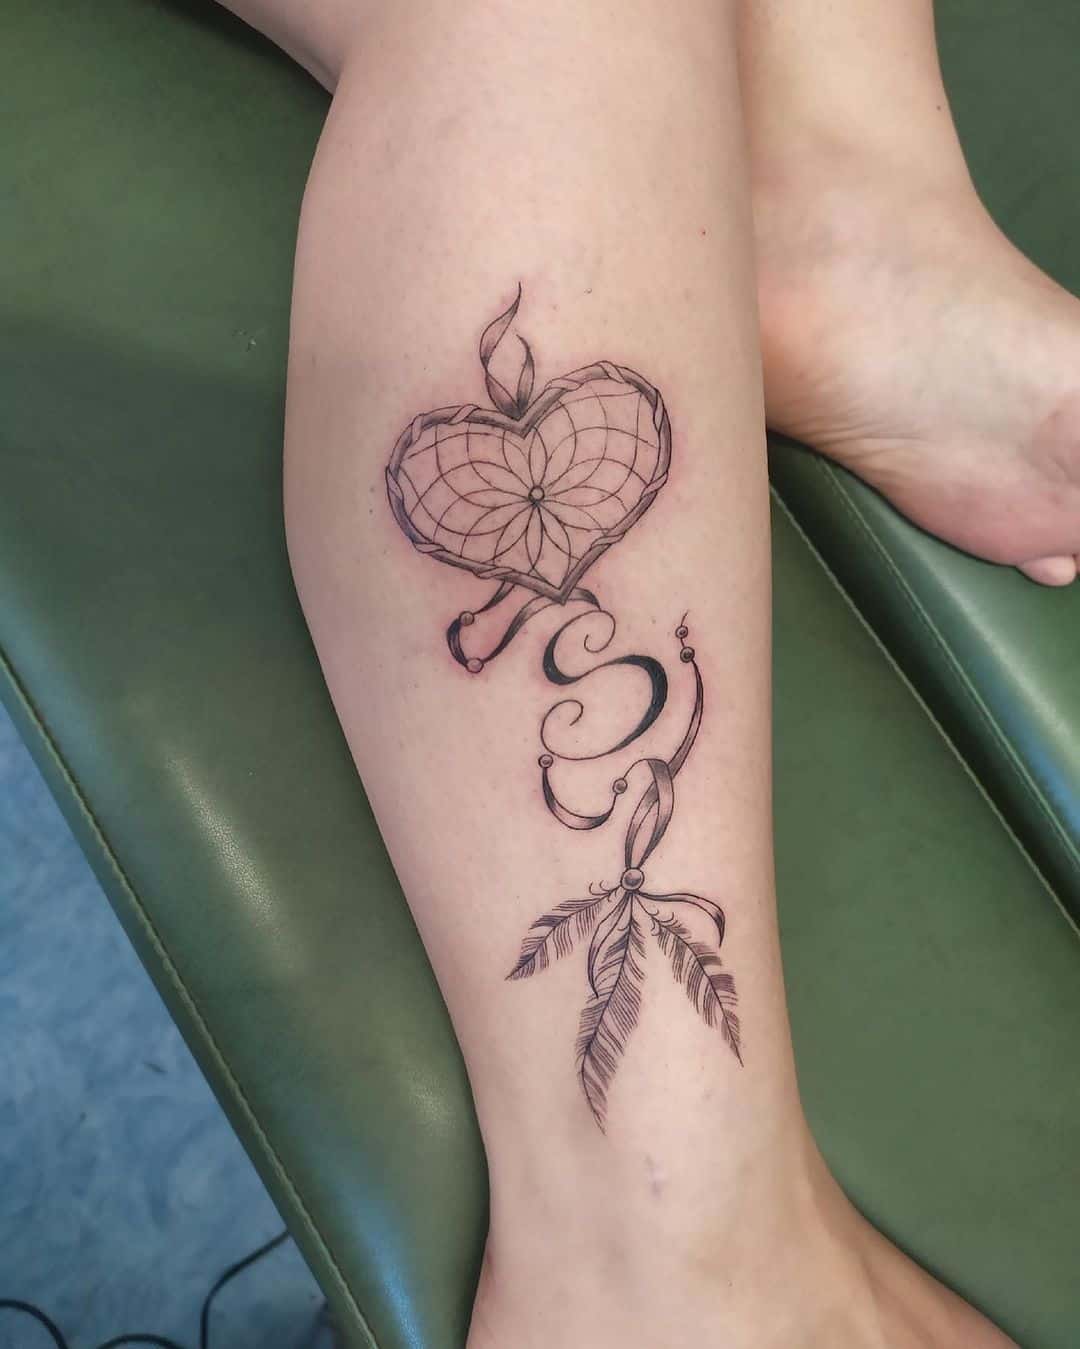 Dreamcatcher Tattoo On Ankle  Tattoo Designs Tattoo Pictures